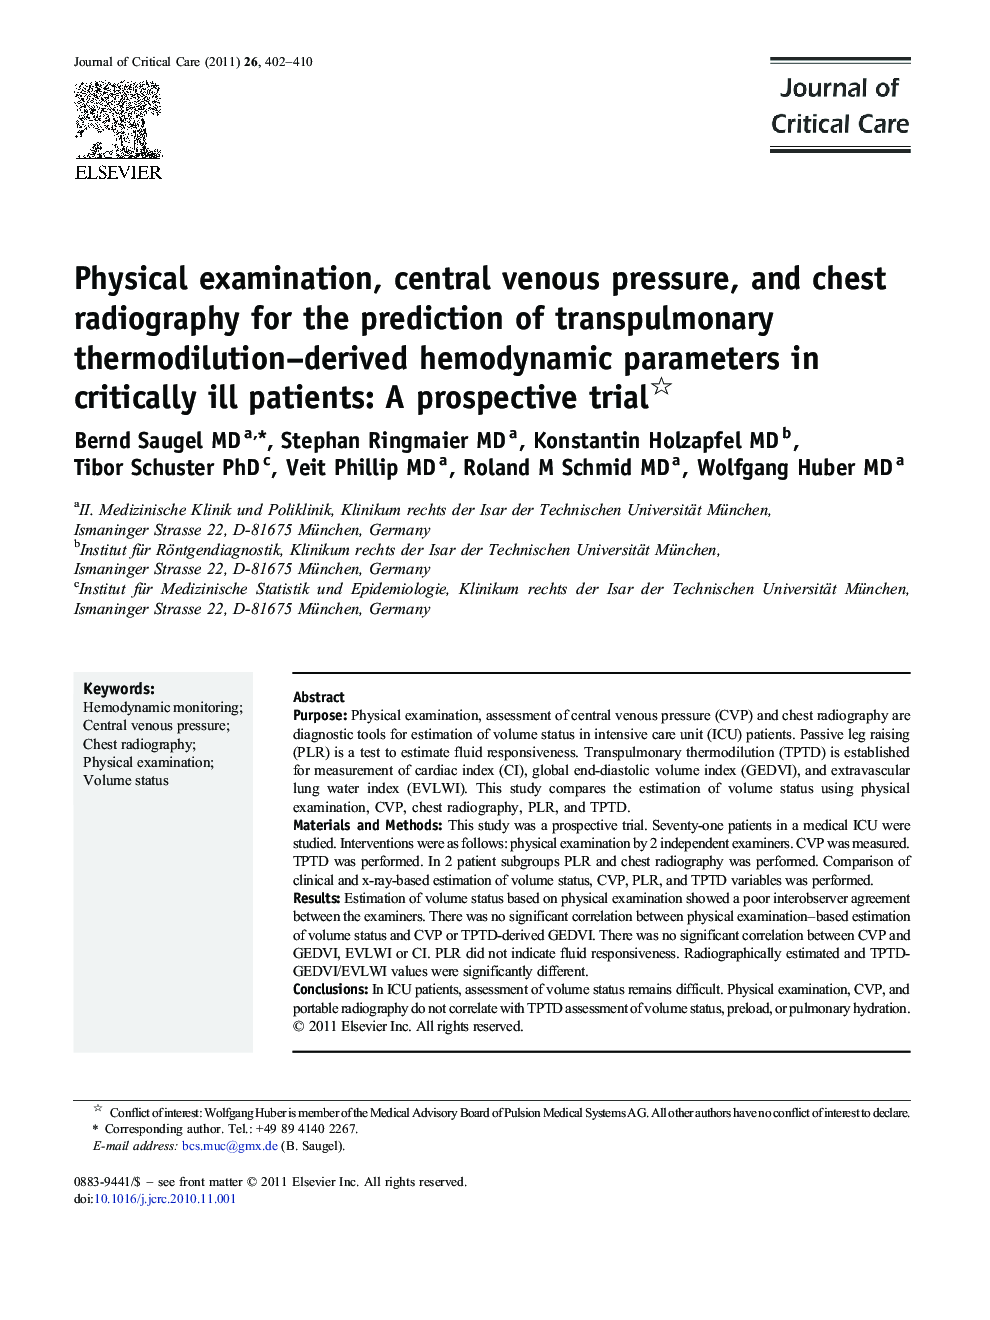 Outcomes/PredictionsPhysical examination, central venous pressure, and chest radiography for the prediction of transpulmonary thermodilution-derived hemodynamic parameters in critically ill patients: A prospective trial